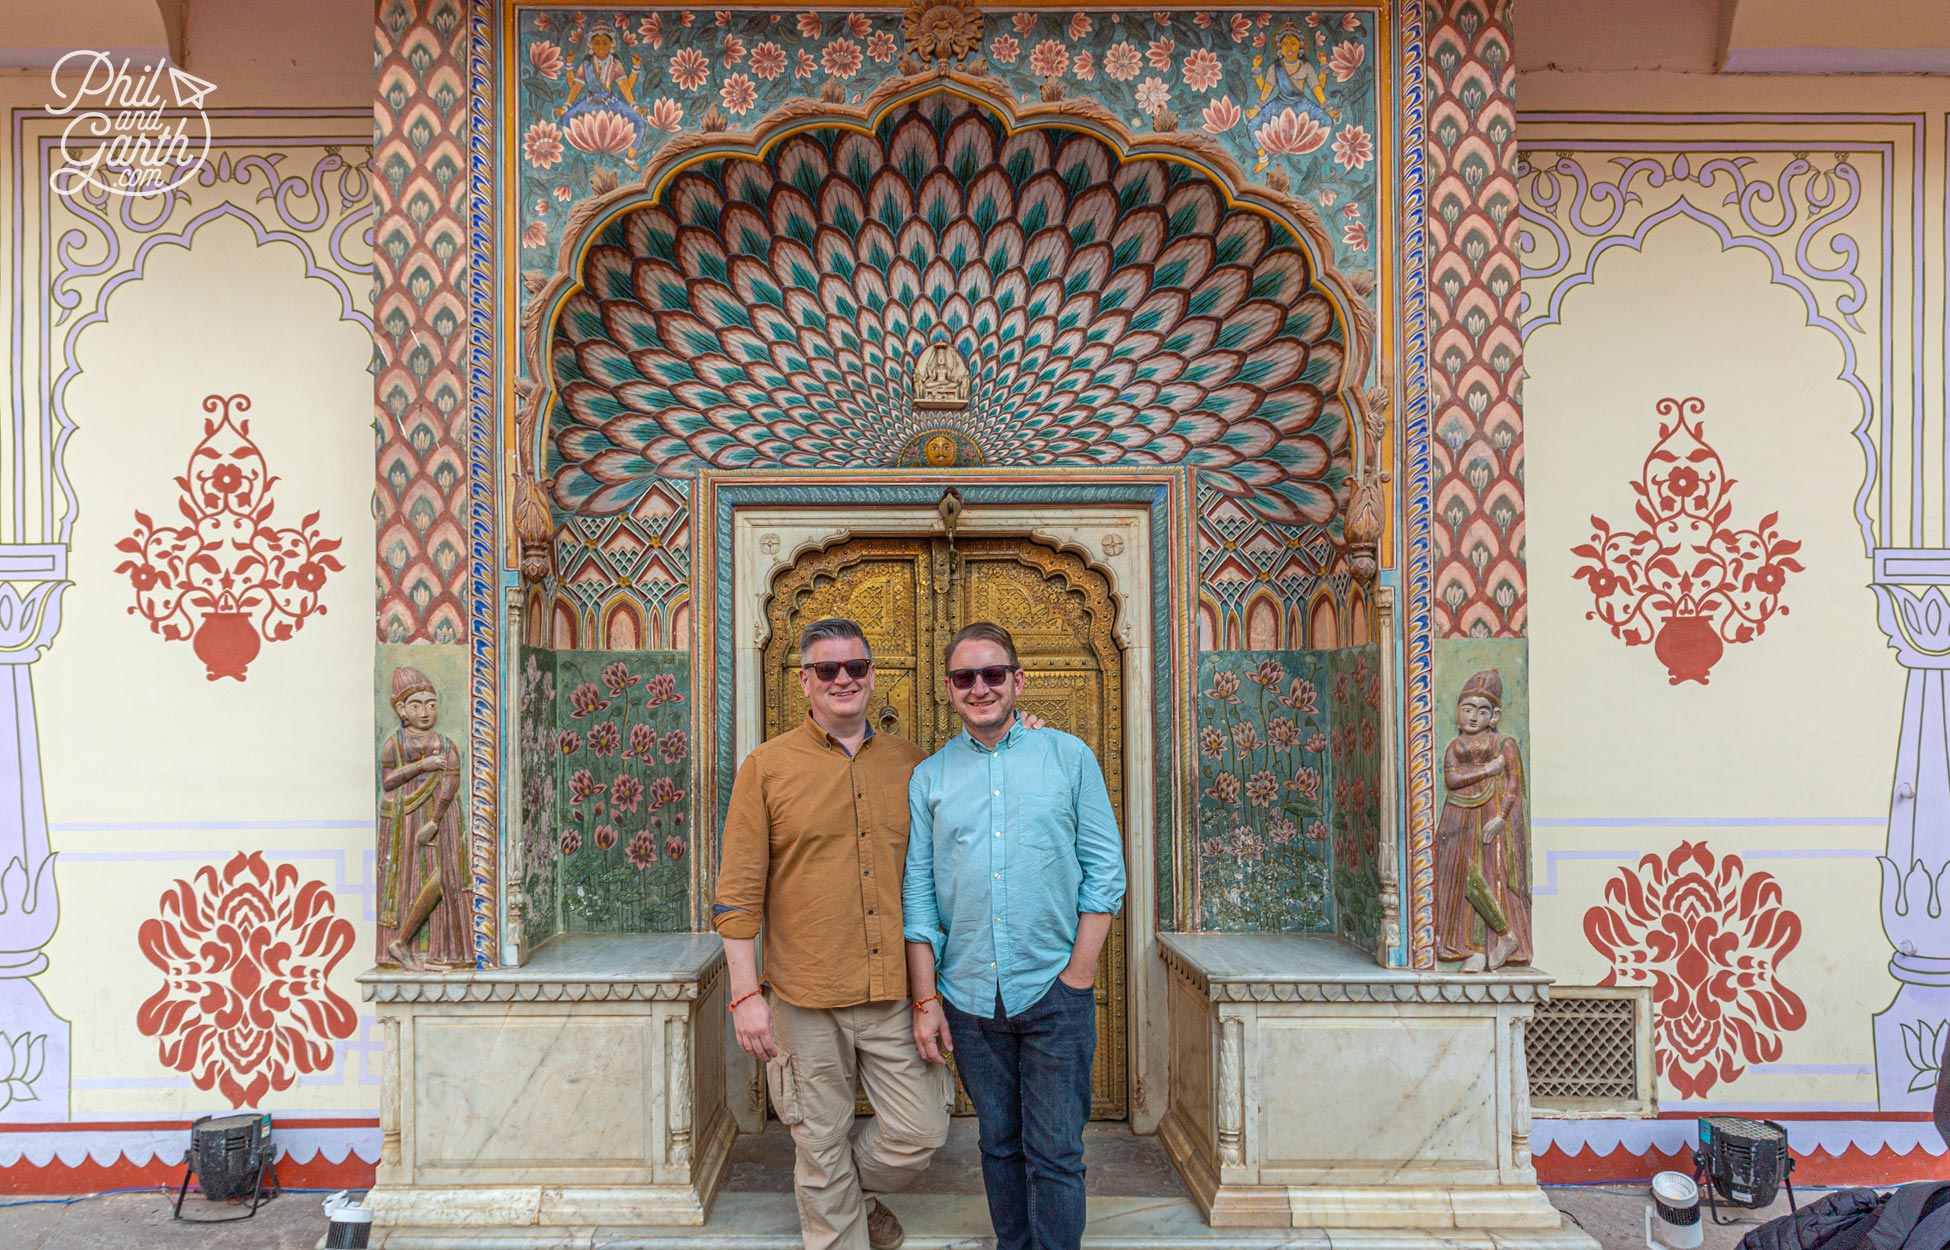 Here we are in front of the Lotus Gate - the summer gate dedicated to Lord Shiva